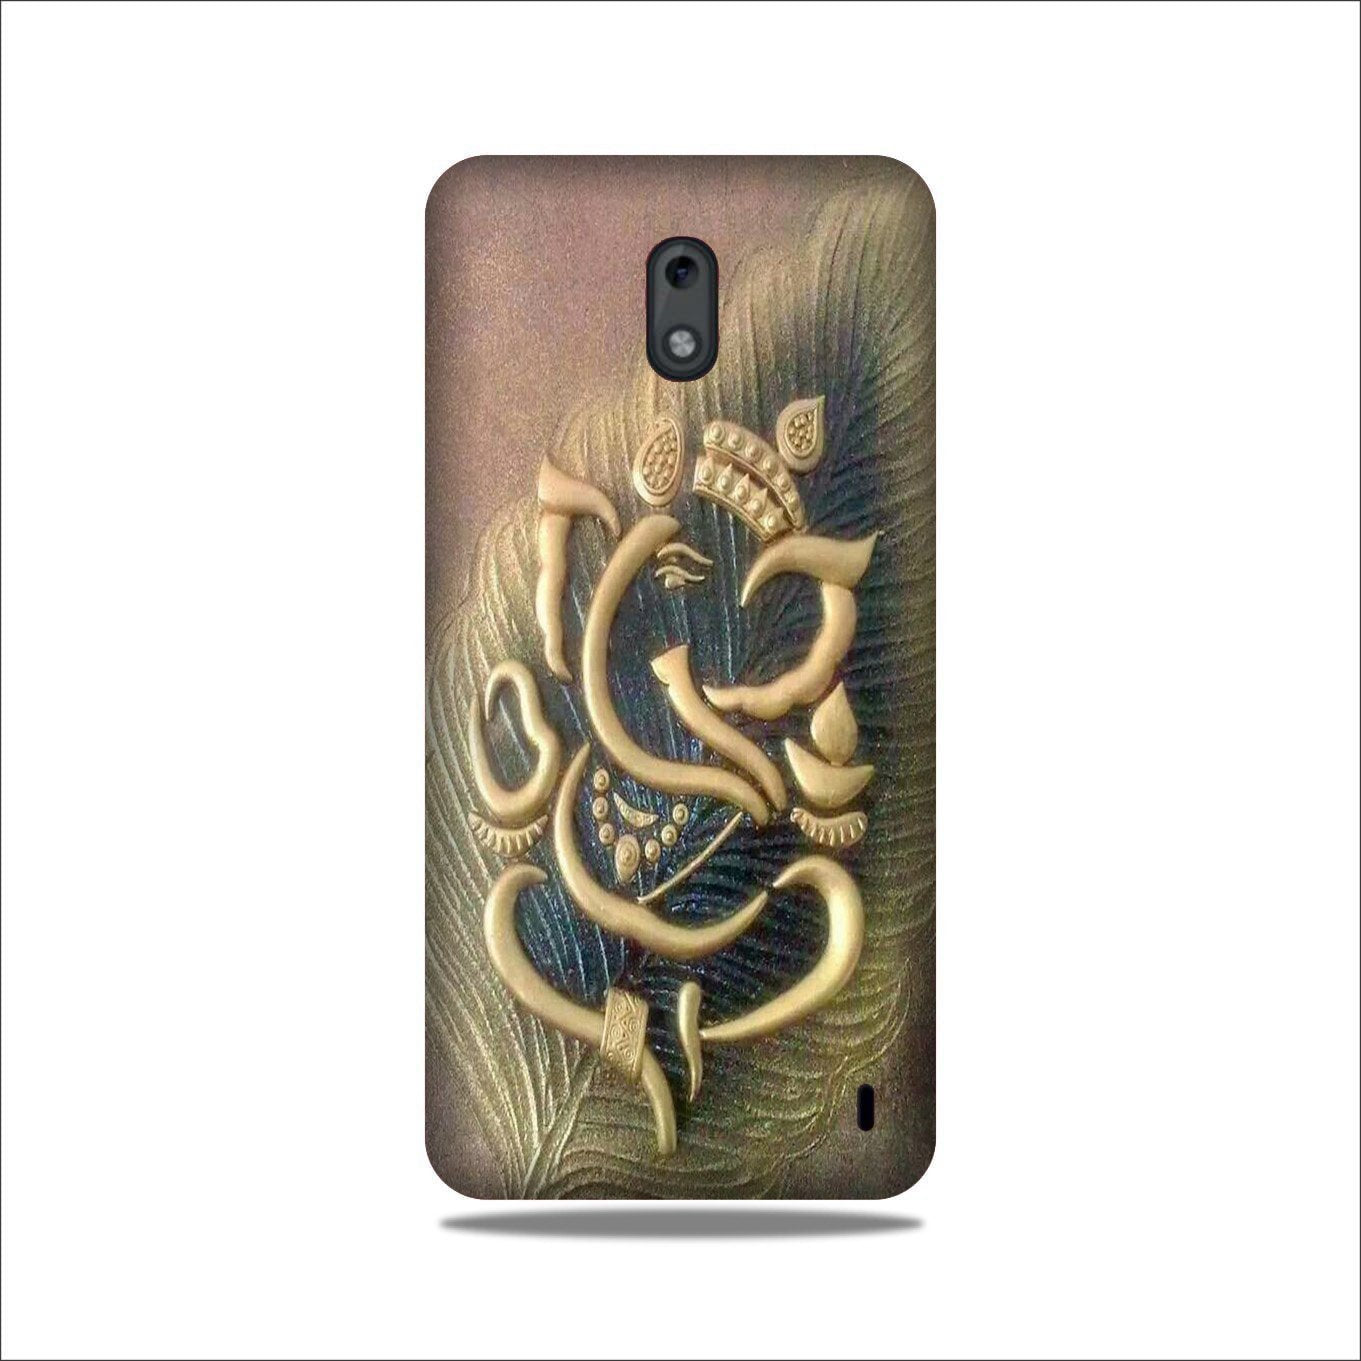 Lord Ganesha Case for Nokia 2